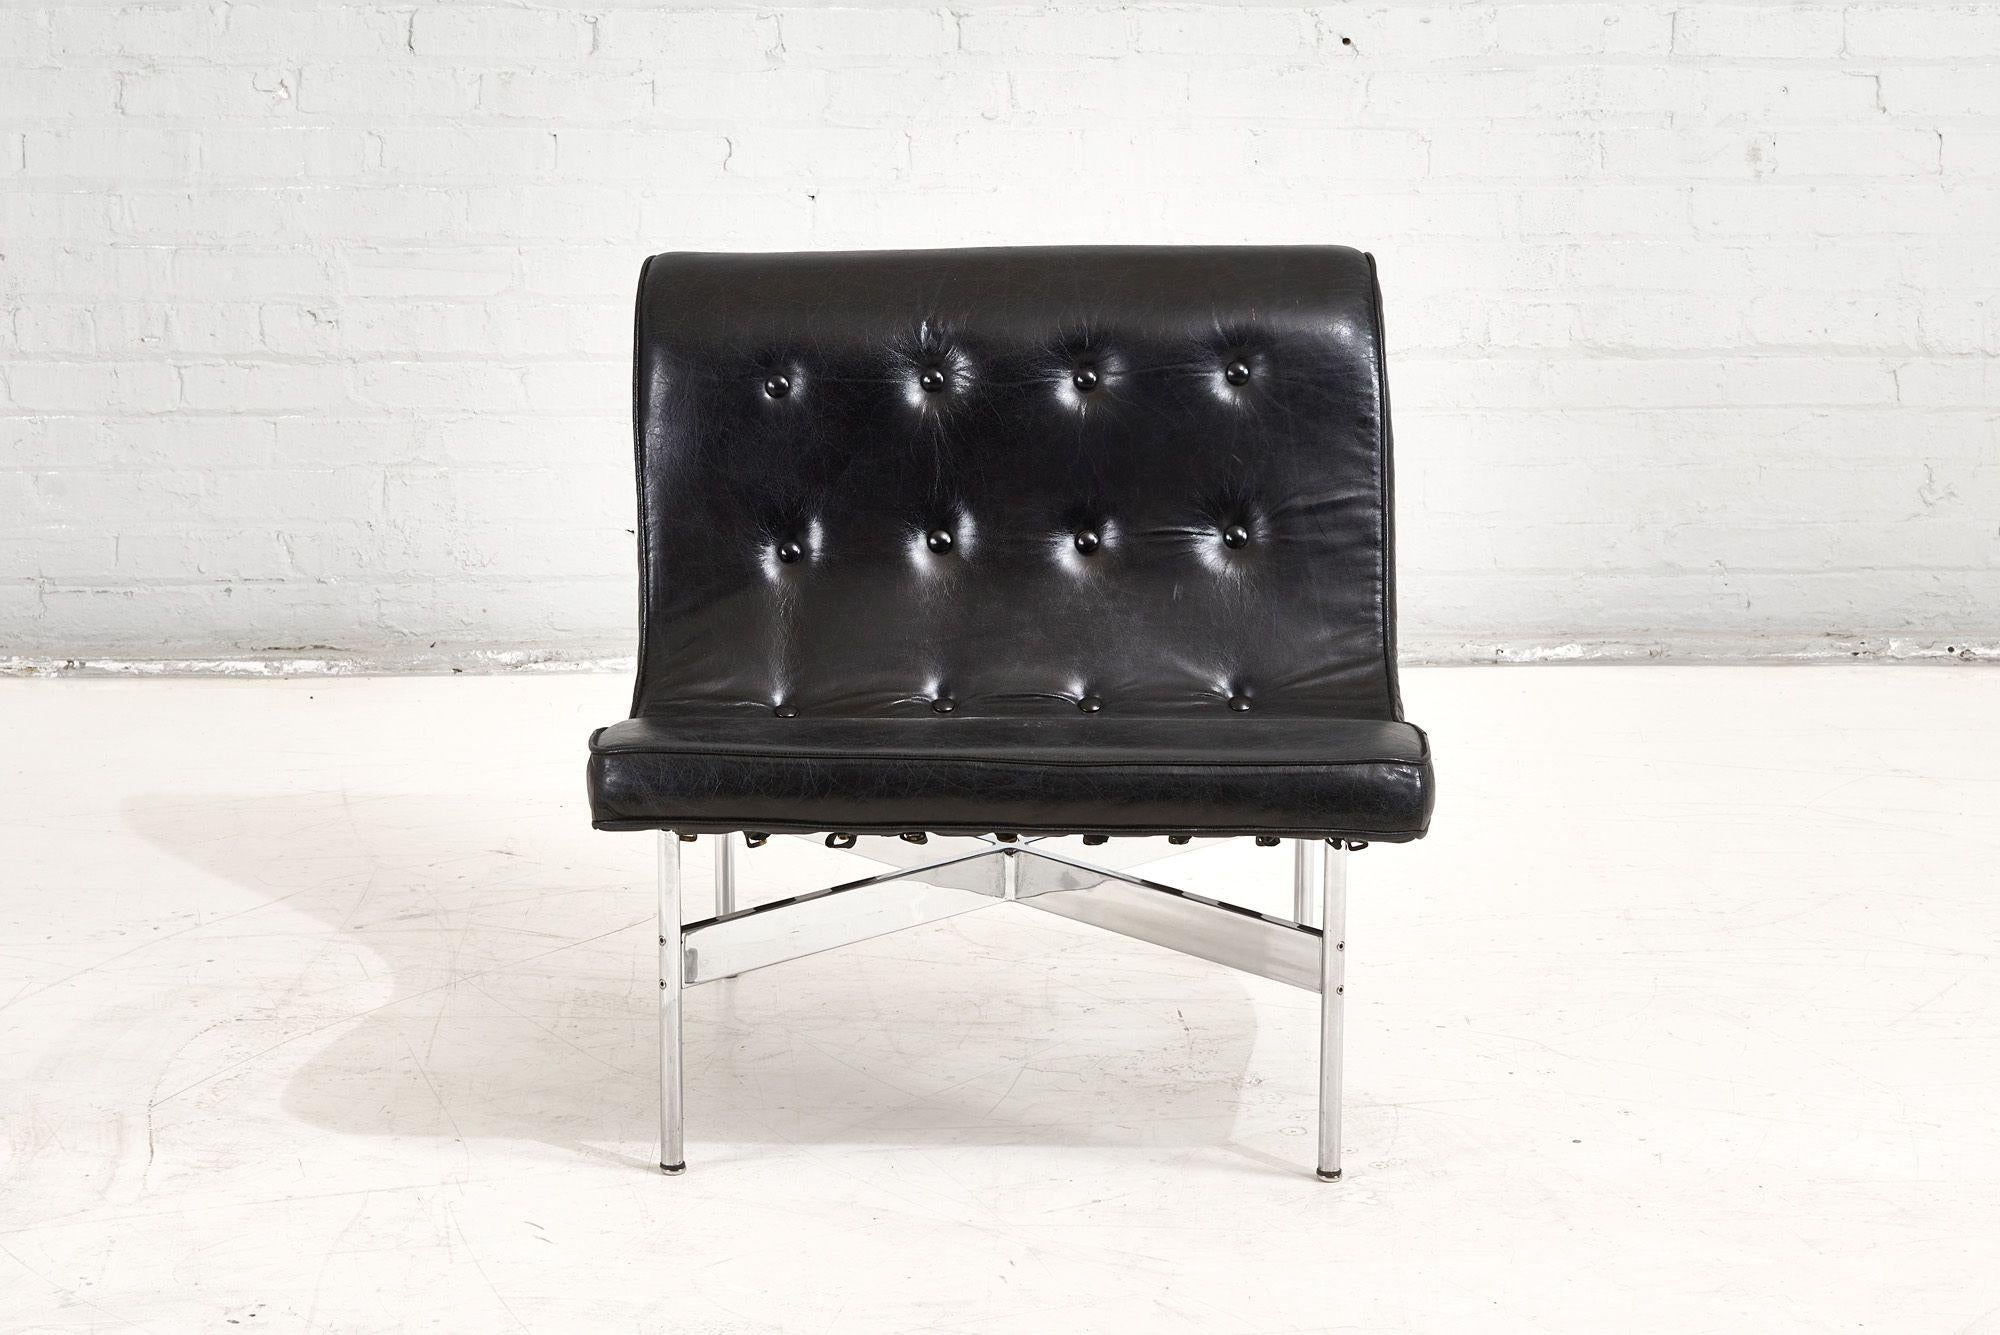 Laverne International “New York” Black Leather and stainless steel Lounge Chair Designed by William Katavolos, Ross Littelll & Douglas Kelley in 1955.